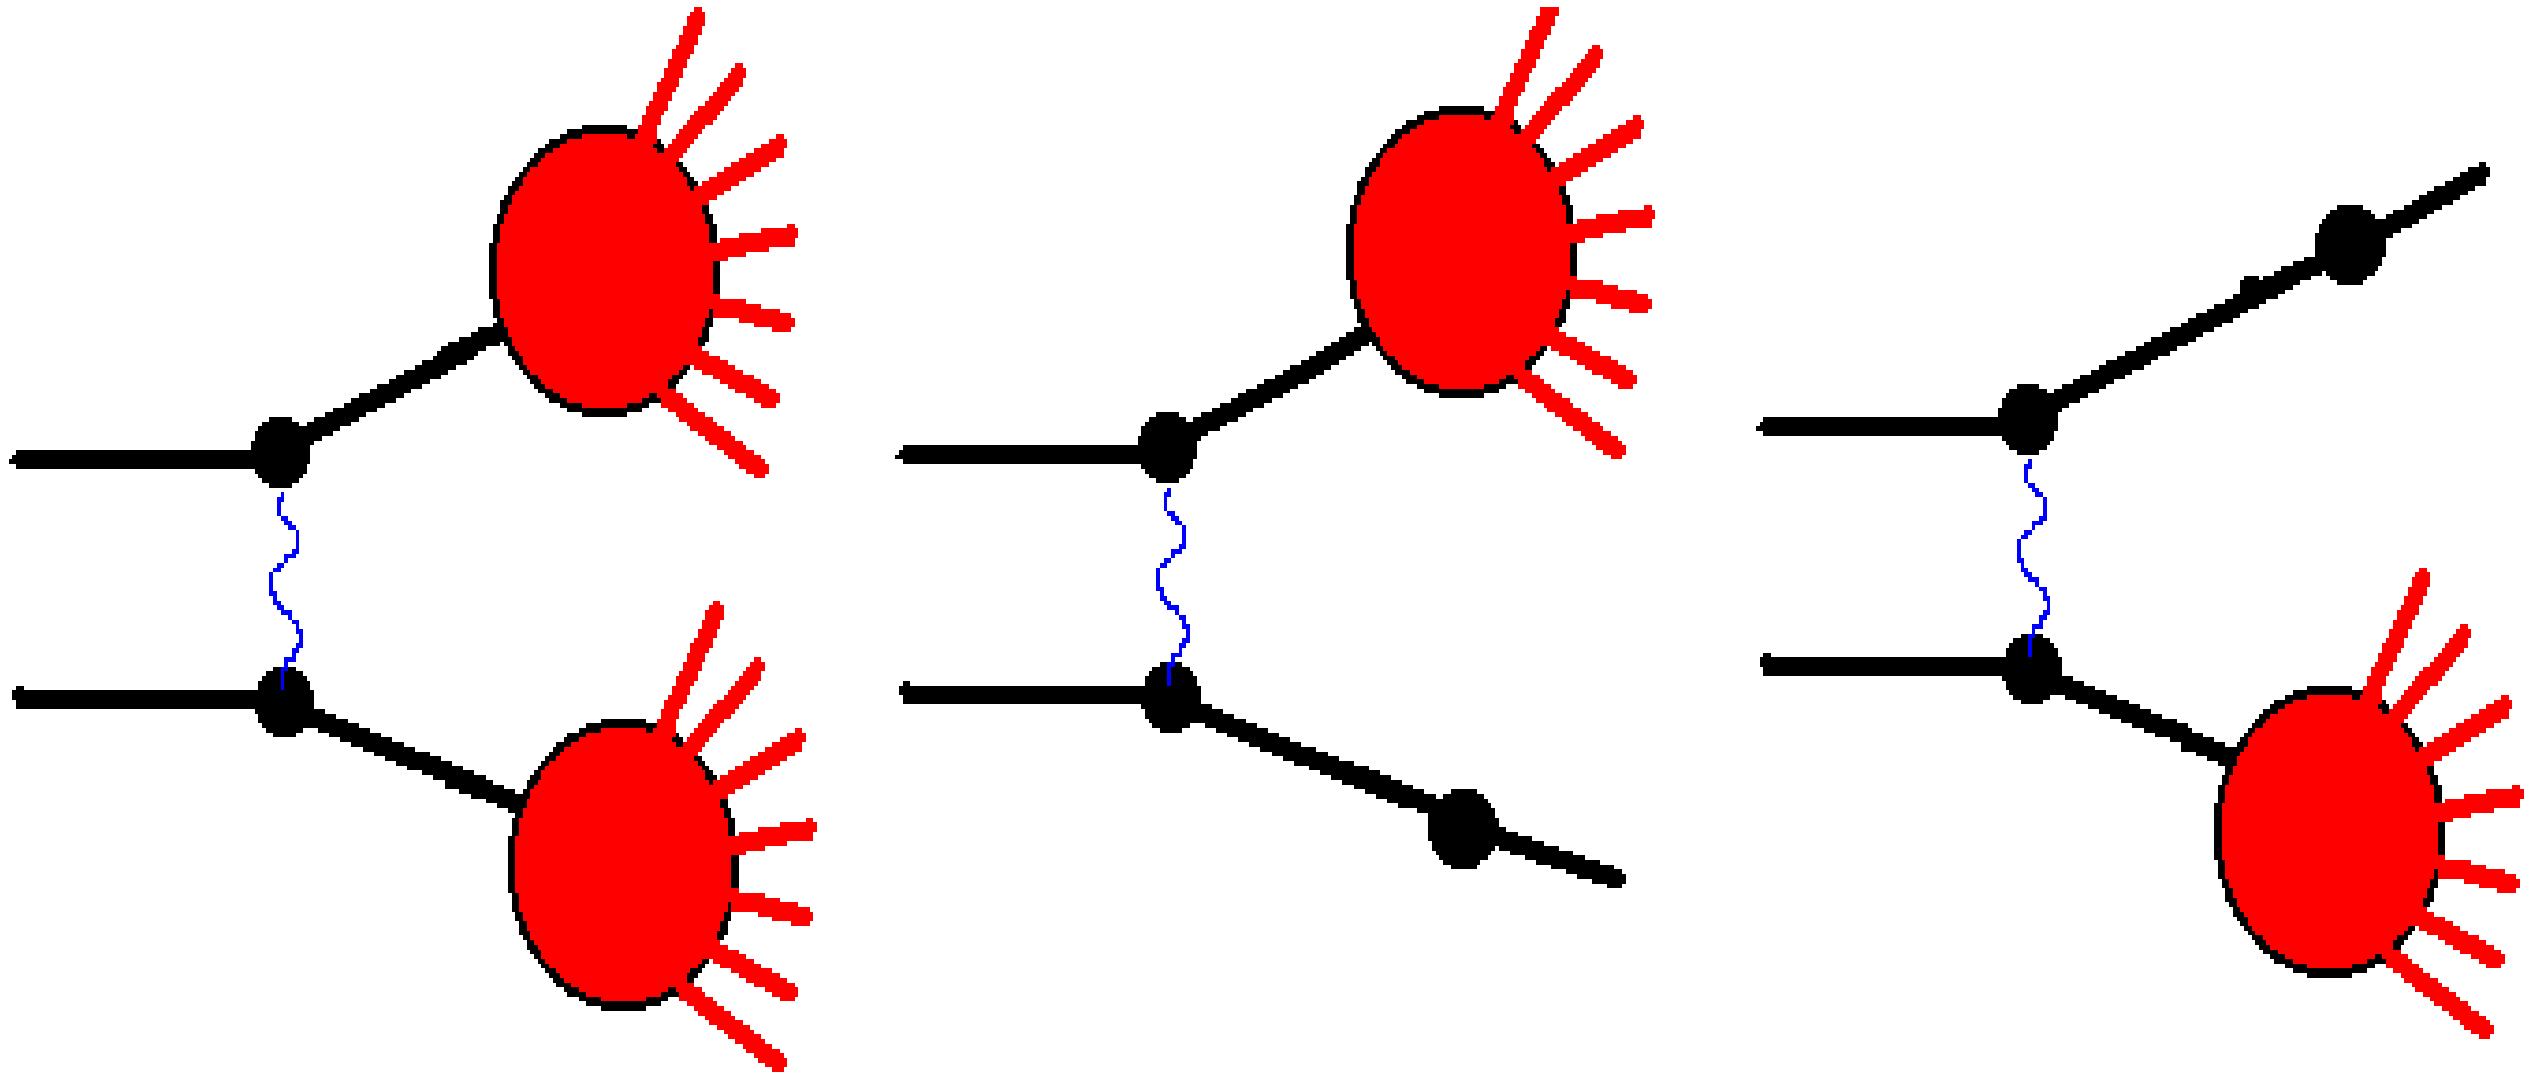 Non-diffractive and diffractive interactions considered in the Fritiof model.